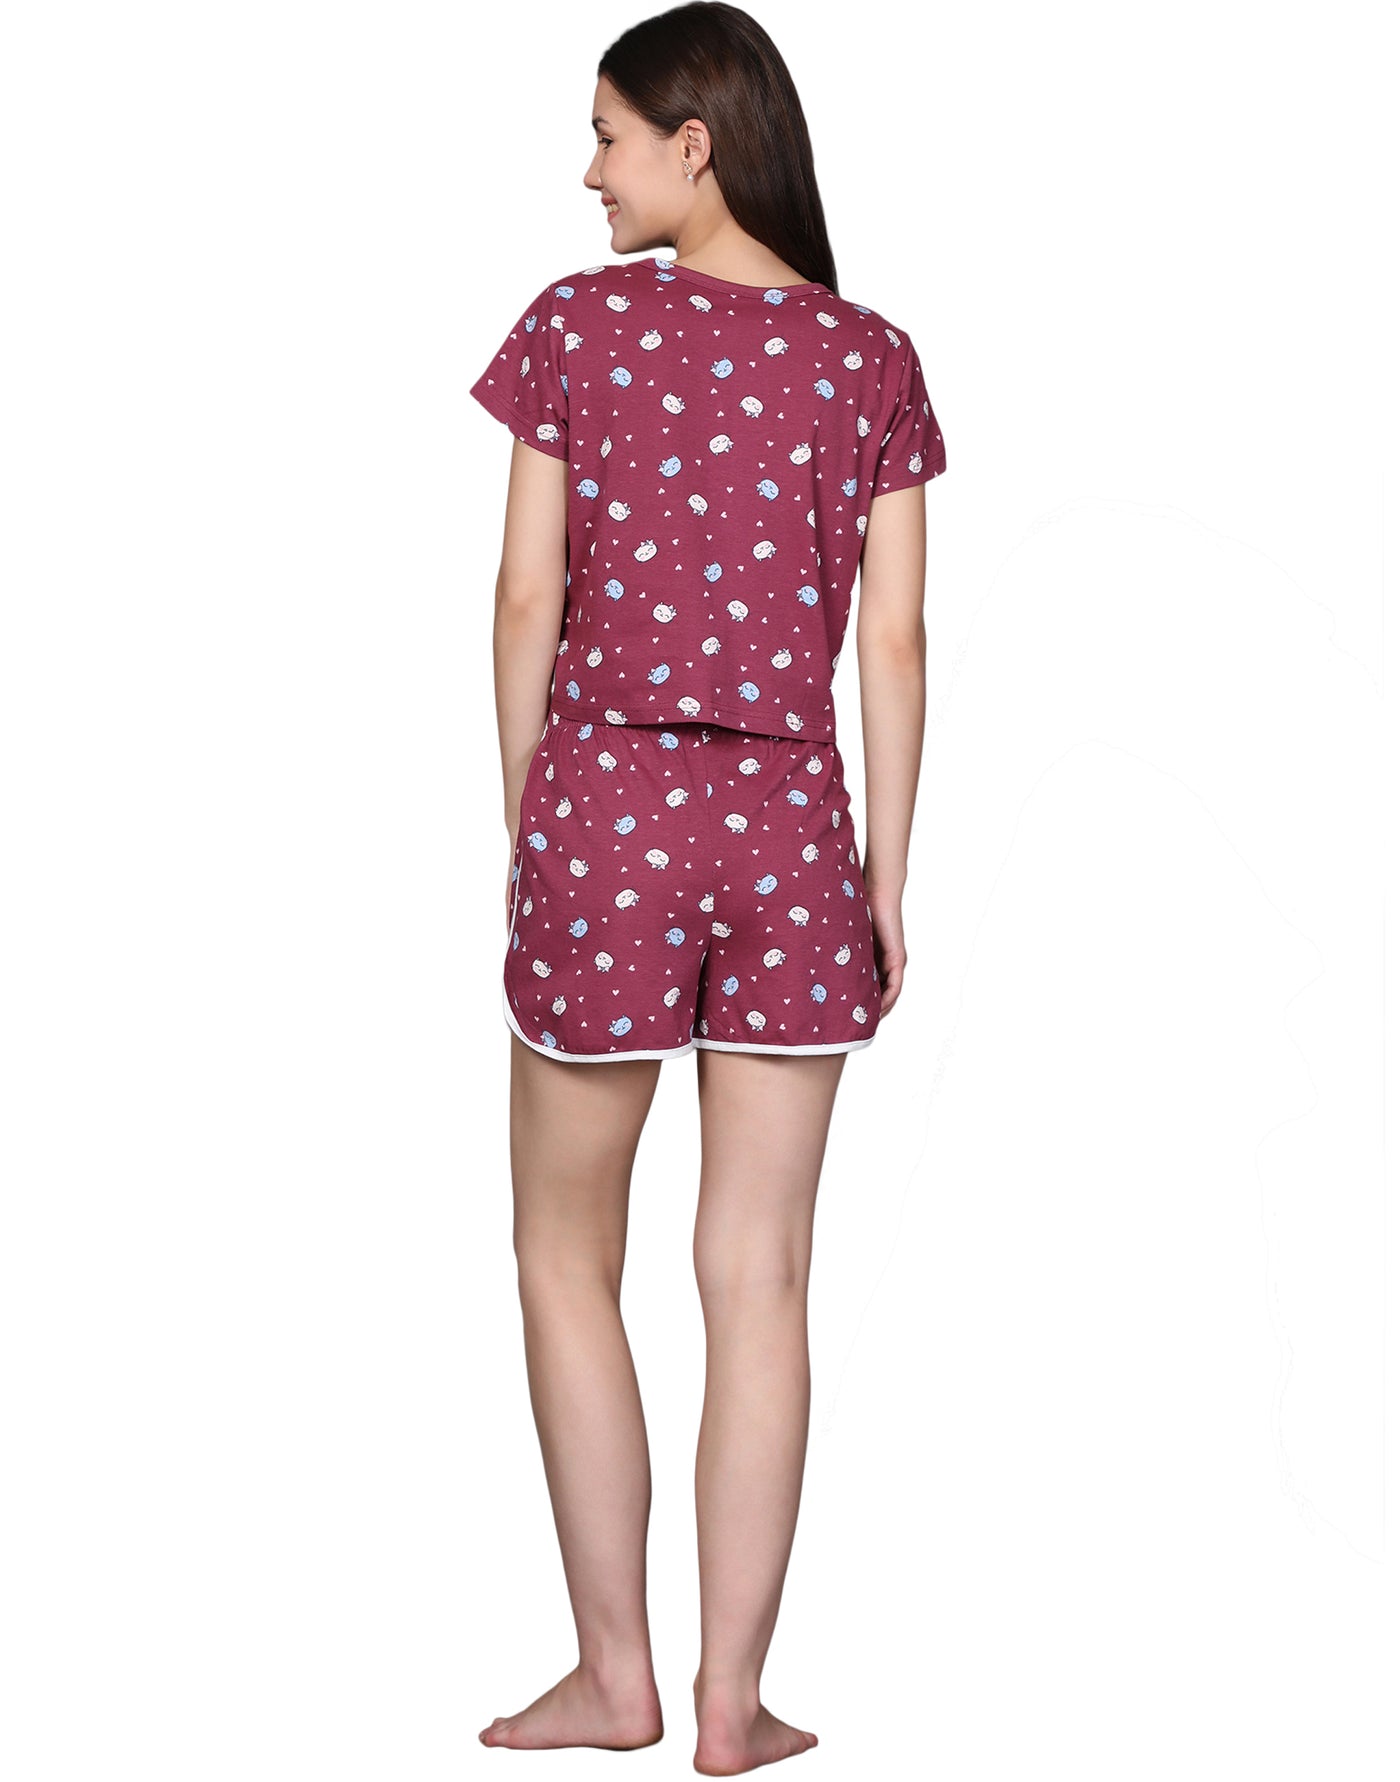 Night Suit Shorty Set for Women-Maroon Cat Print